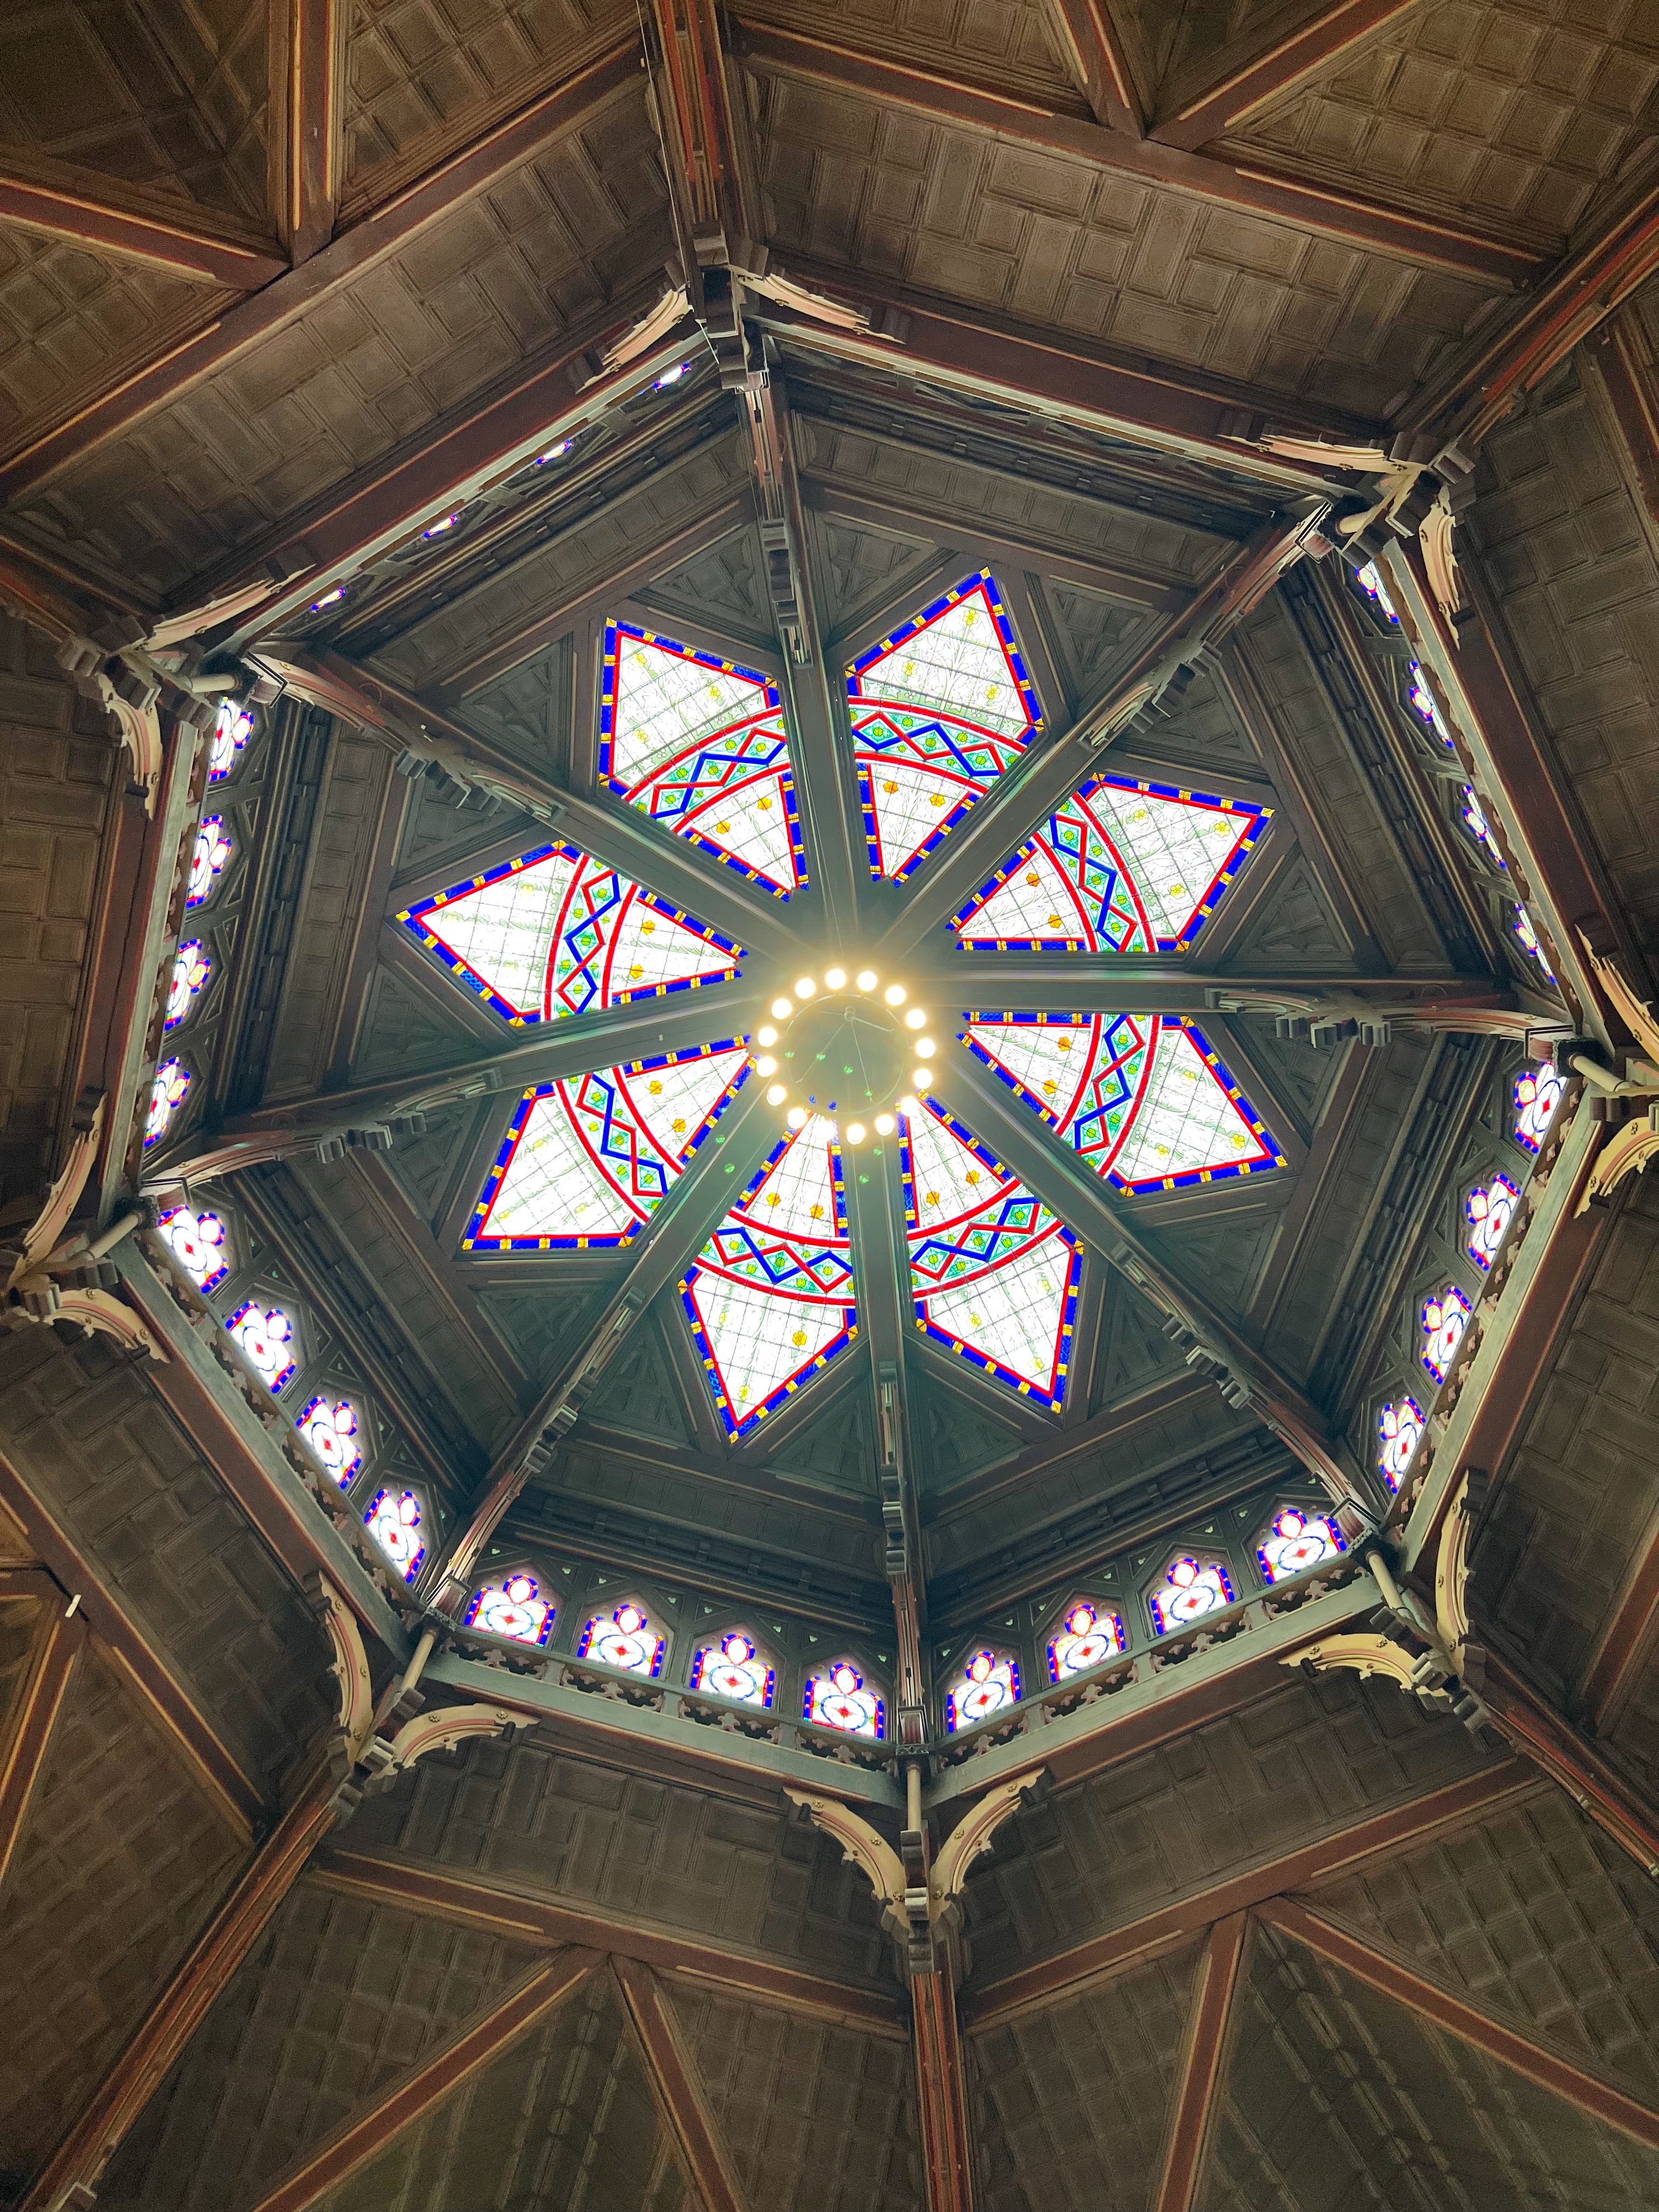 ornate ceiling of rotunda with stained glasses windows